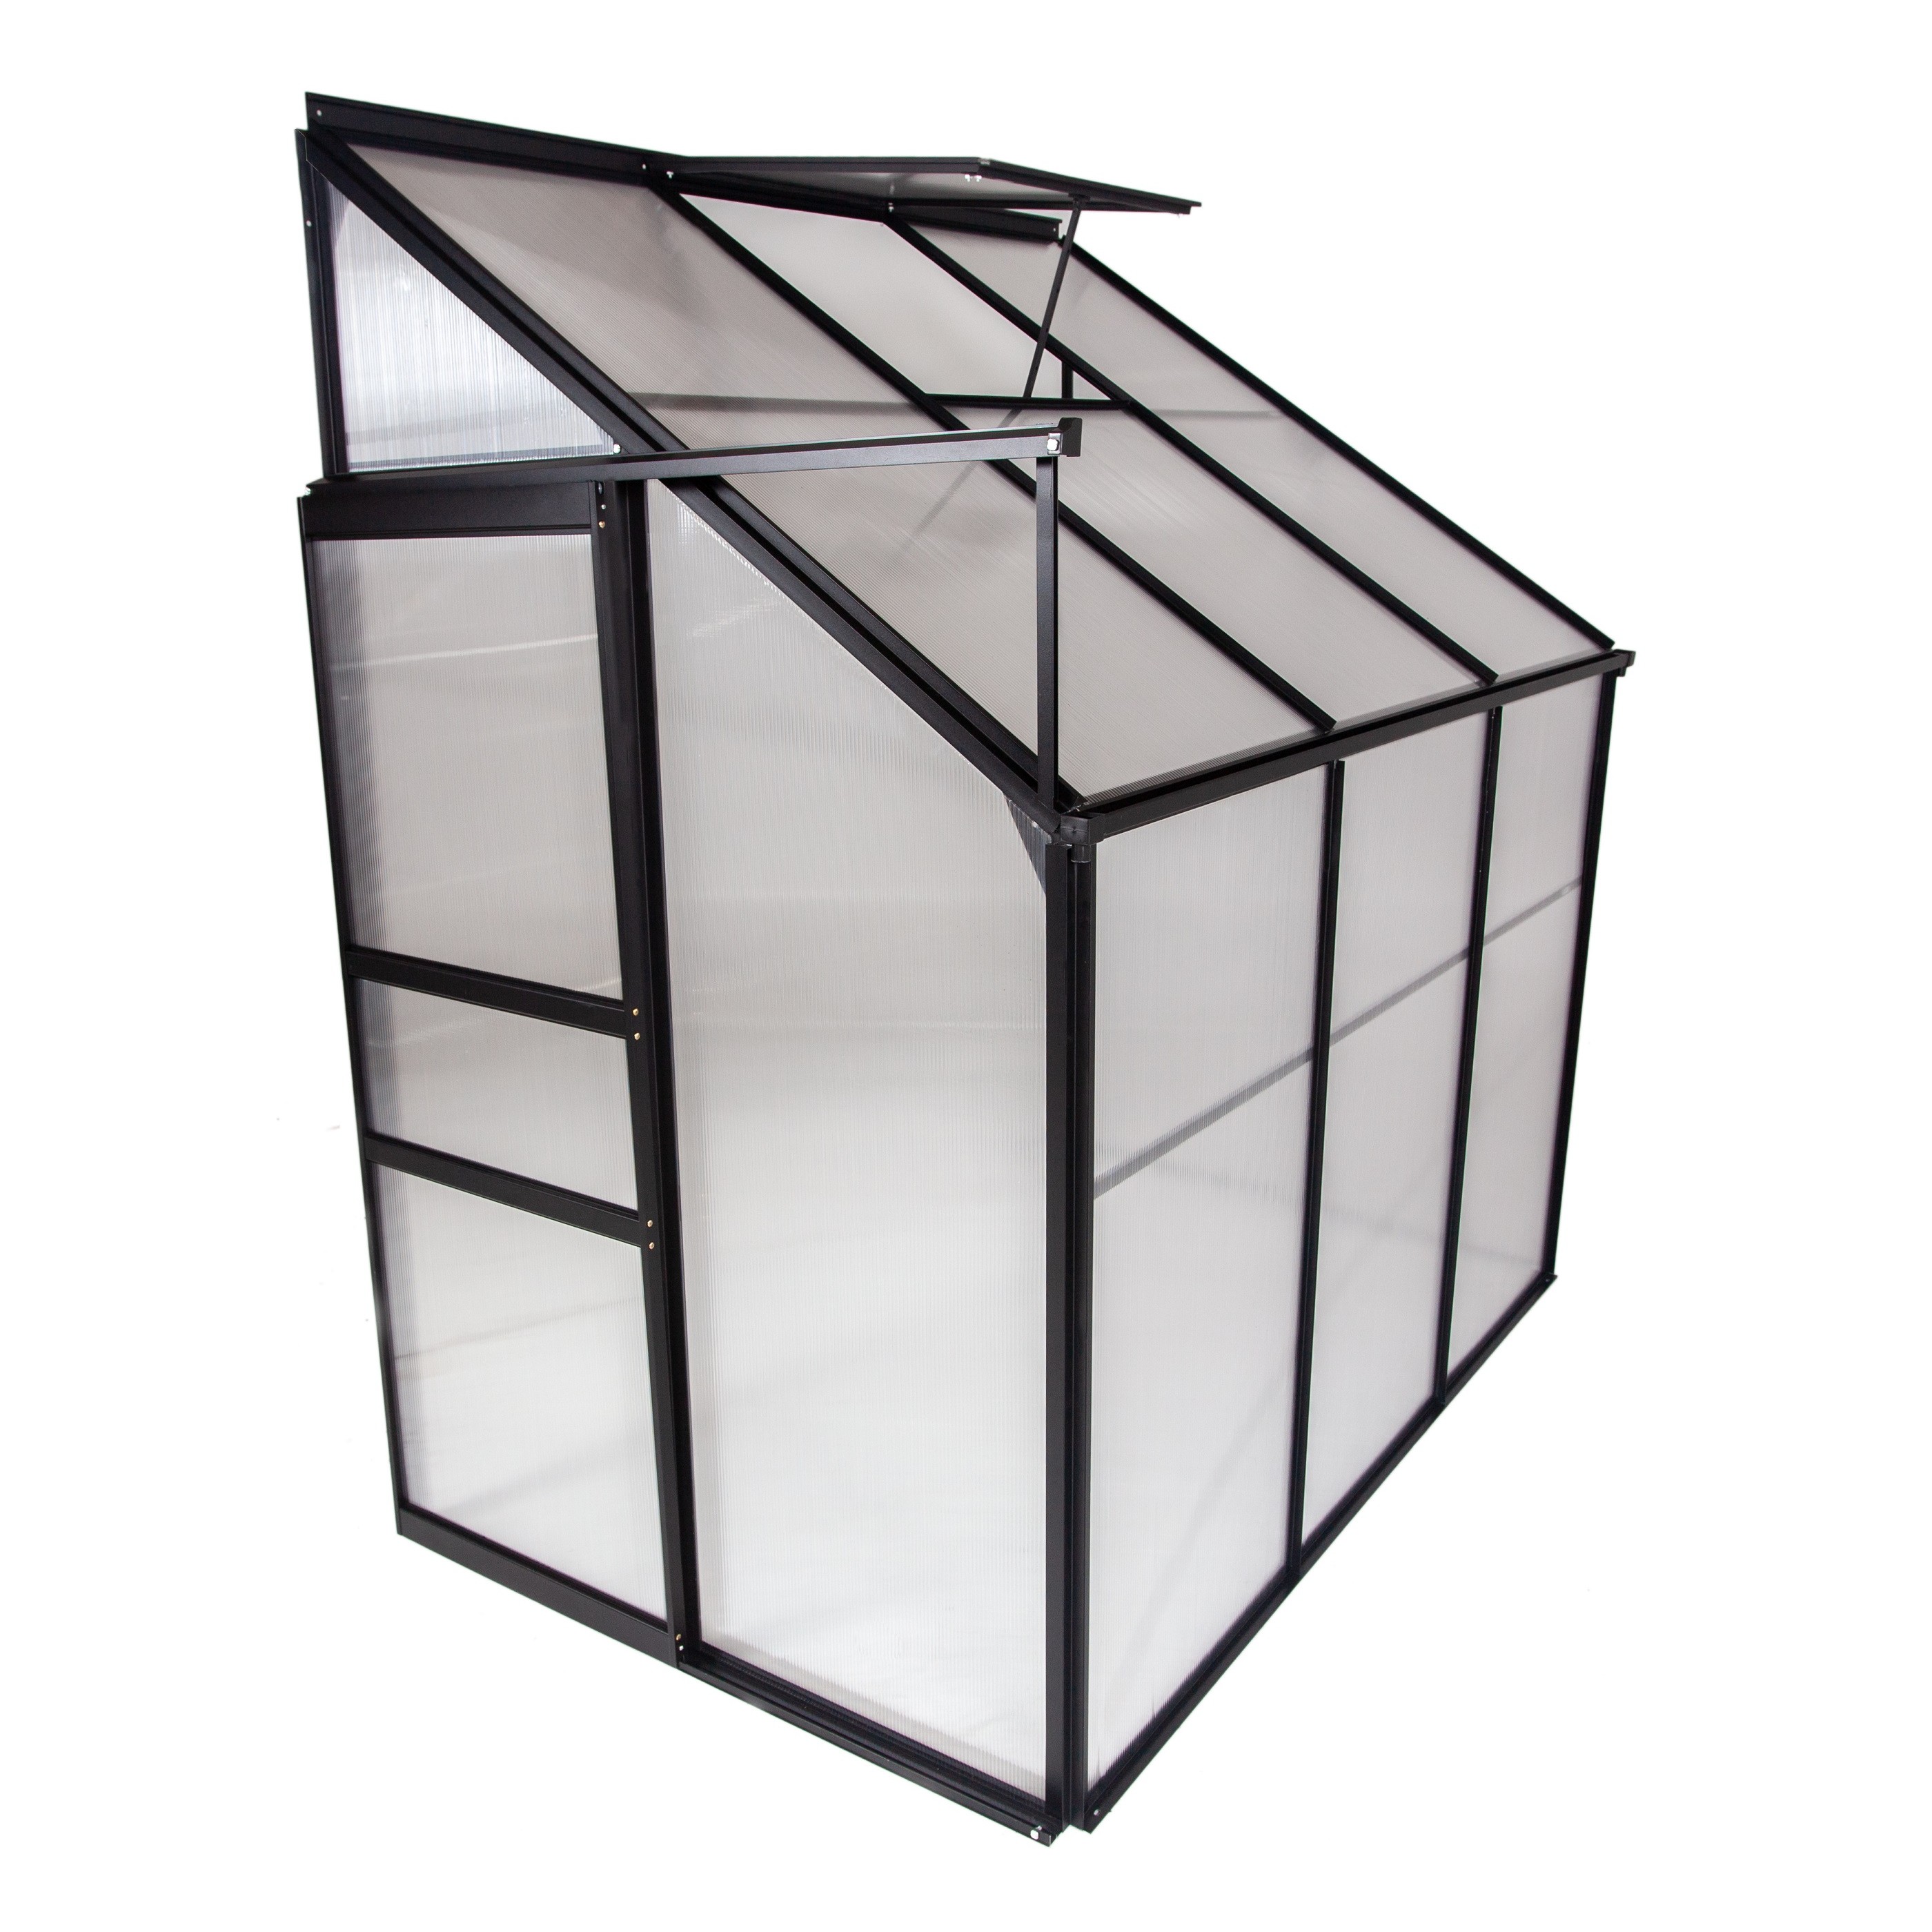 Ogrow 4x6 Ft. Walk In Lean-To Greenhouse - Large Aluminium Lawn & Garden Grow House - 25 Sq. Ft / 2.32 Mq - Clear